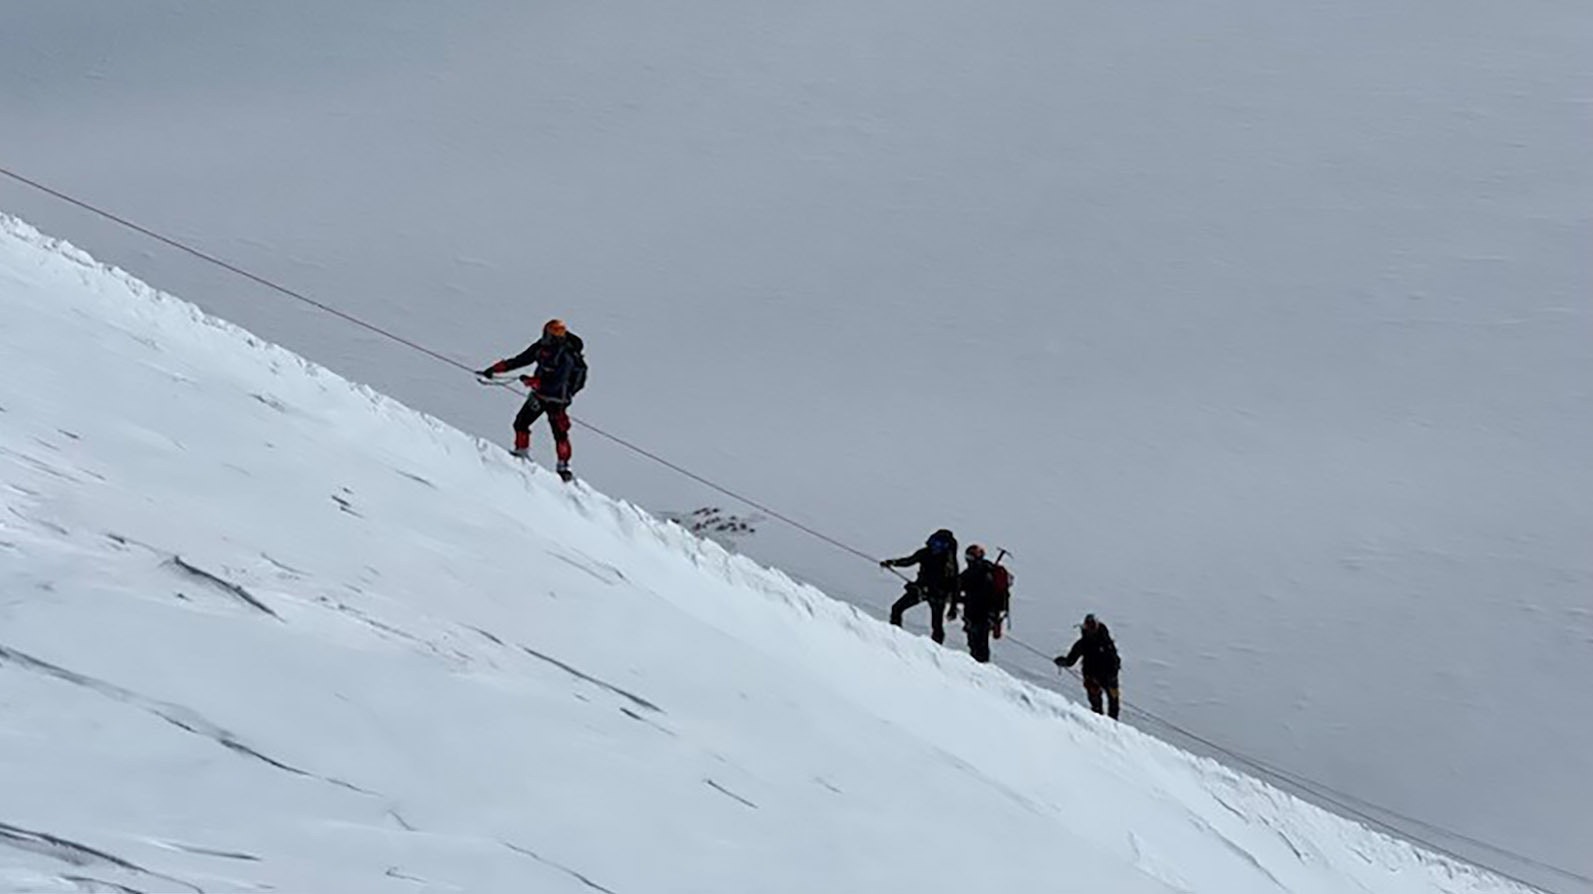 Members of Dr. Joe McGinley’s team on the ascent of Mount Vinson.